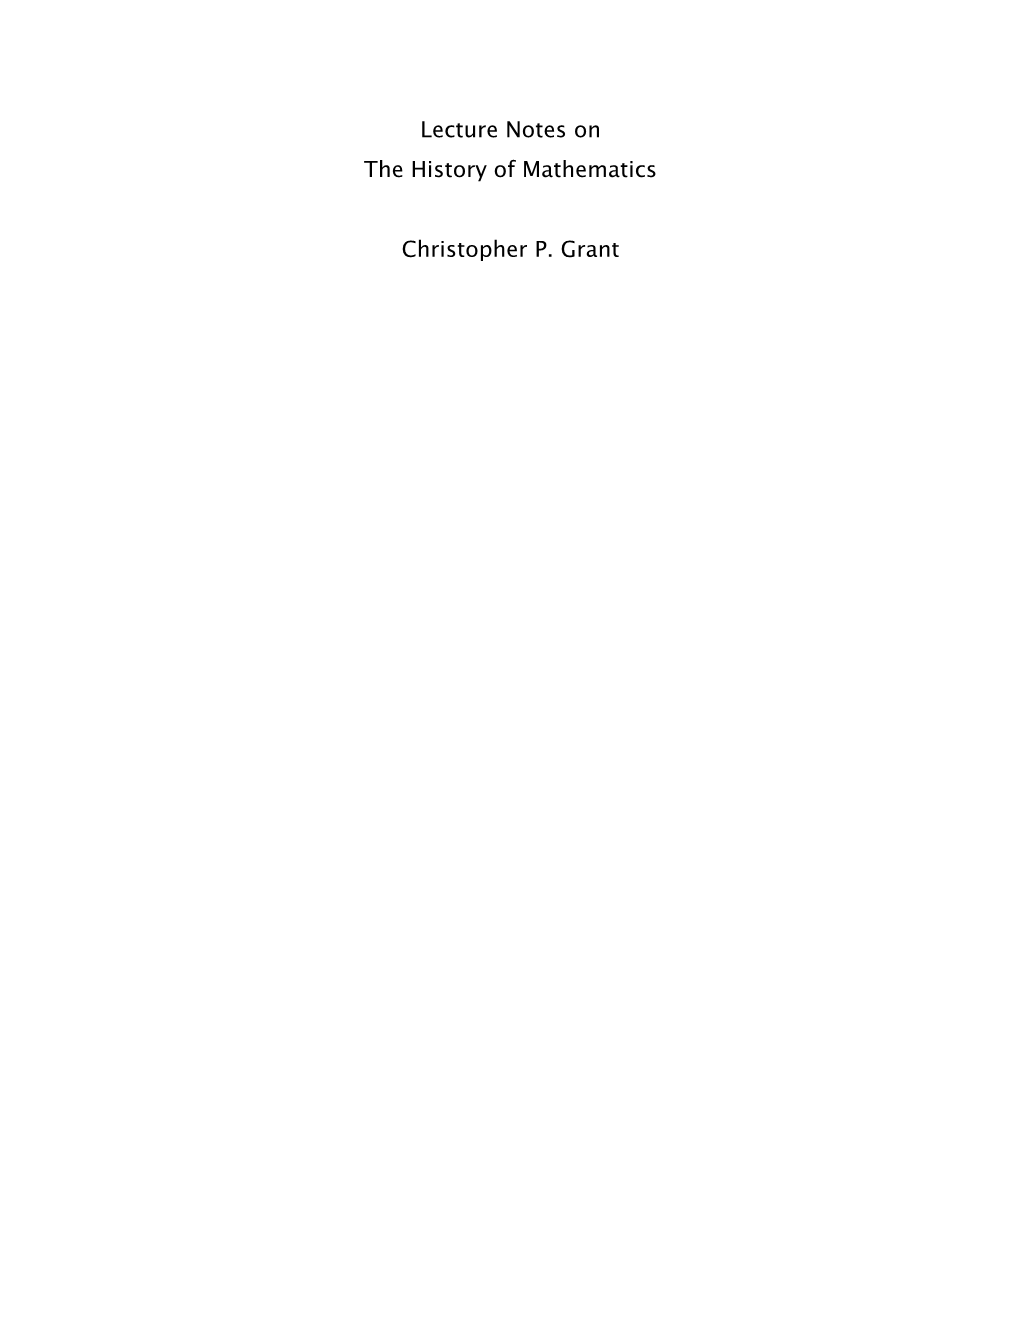 Lecture Notes on the History of Mathematics Christopher P. Grant